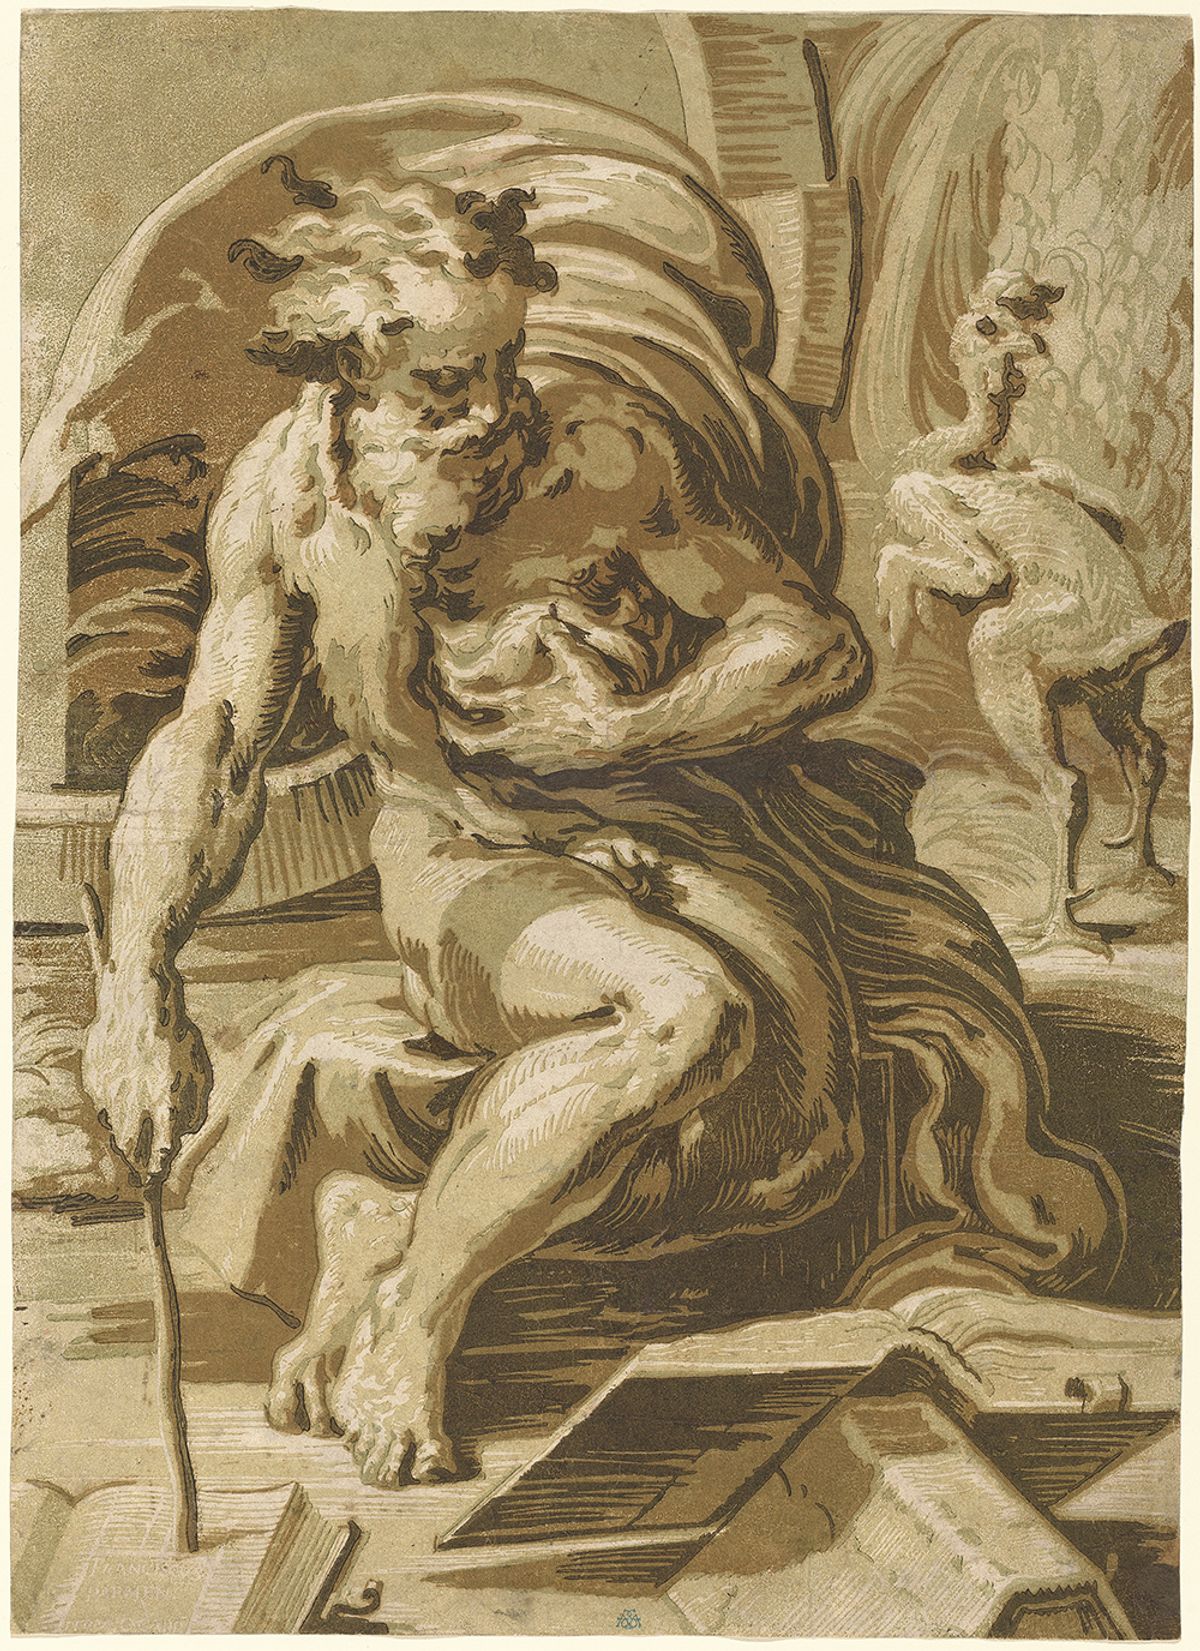 Ugo da Carpi's woodcut from around 1527-30, inspired by Parmigianino's Diogenes Courtesy of National Gallery of Art